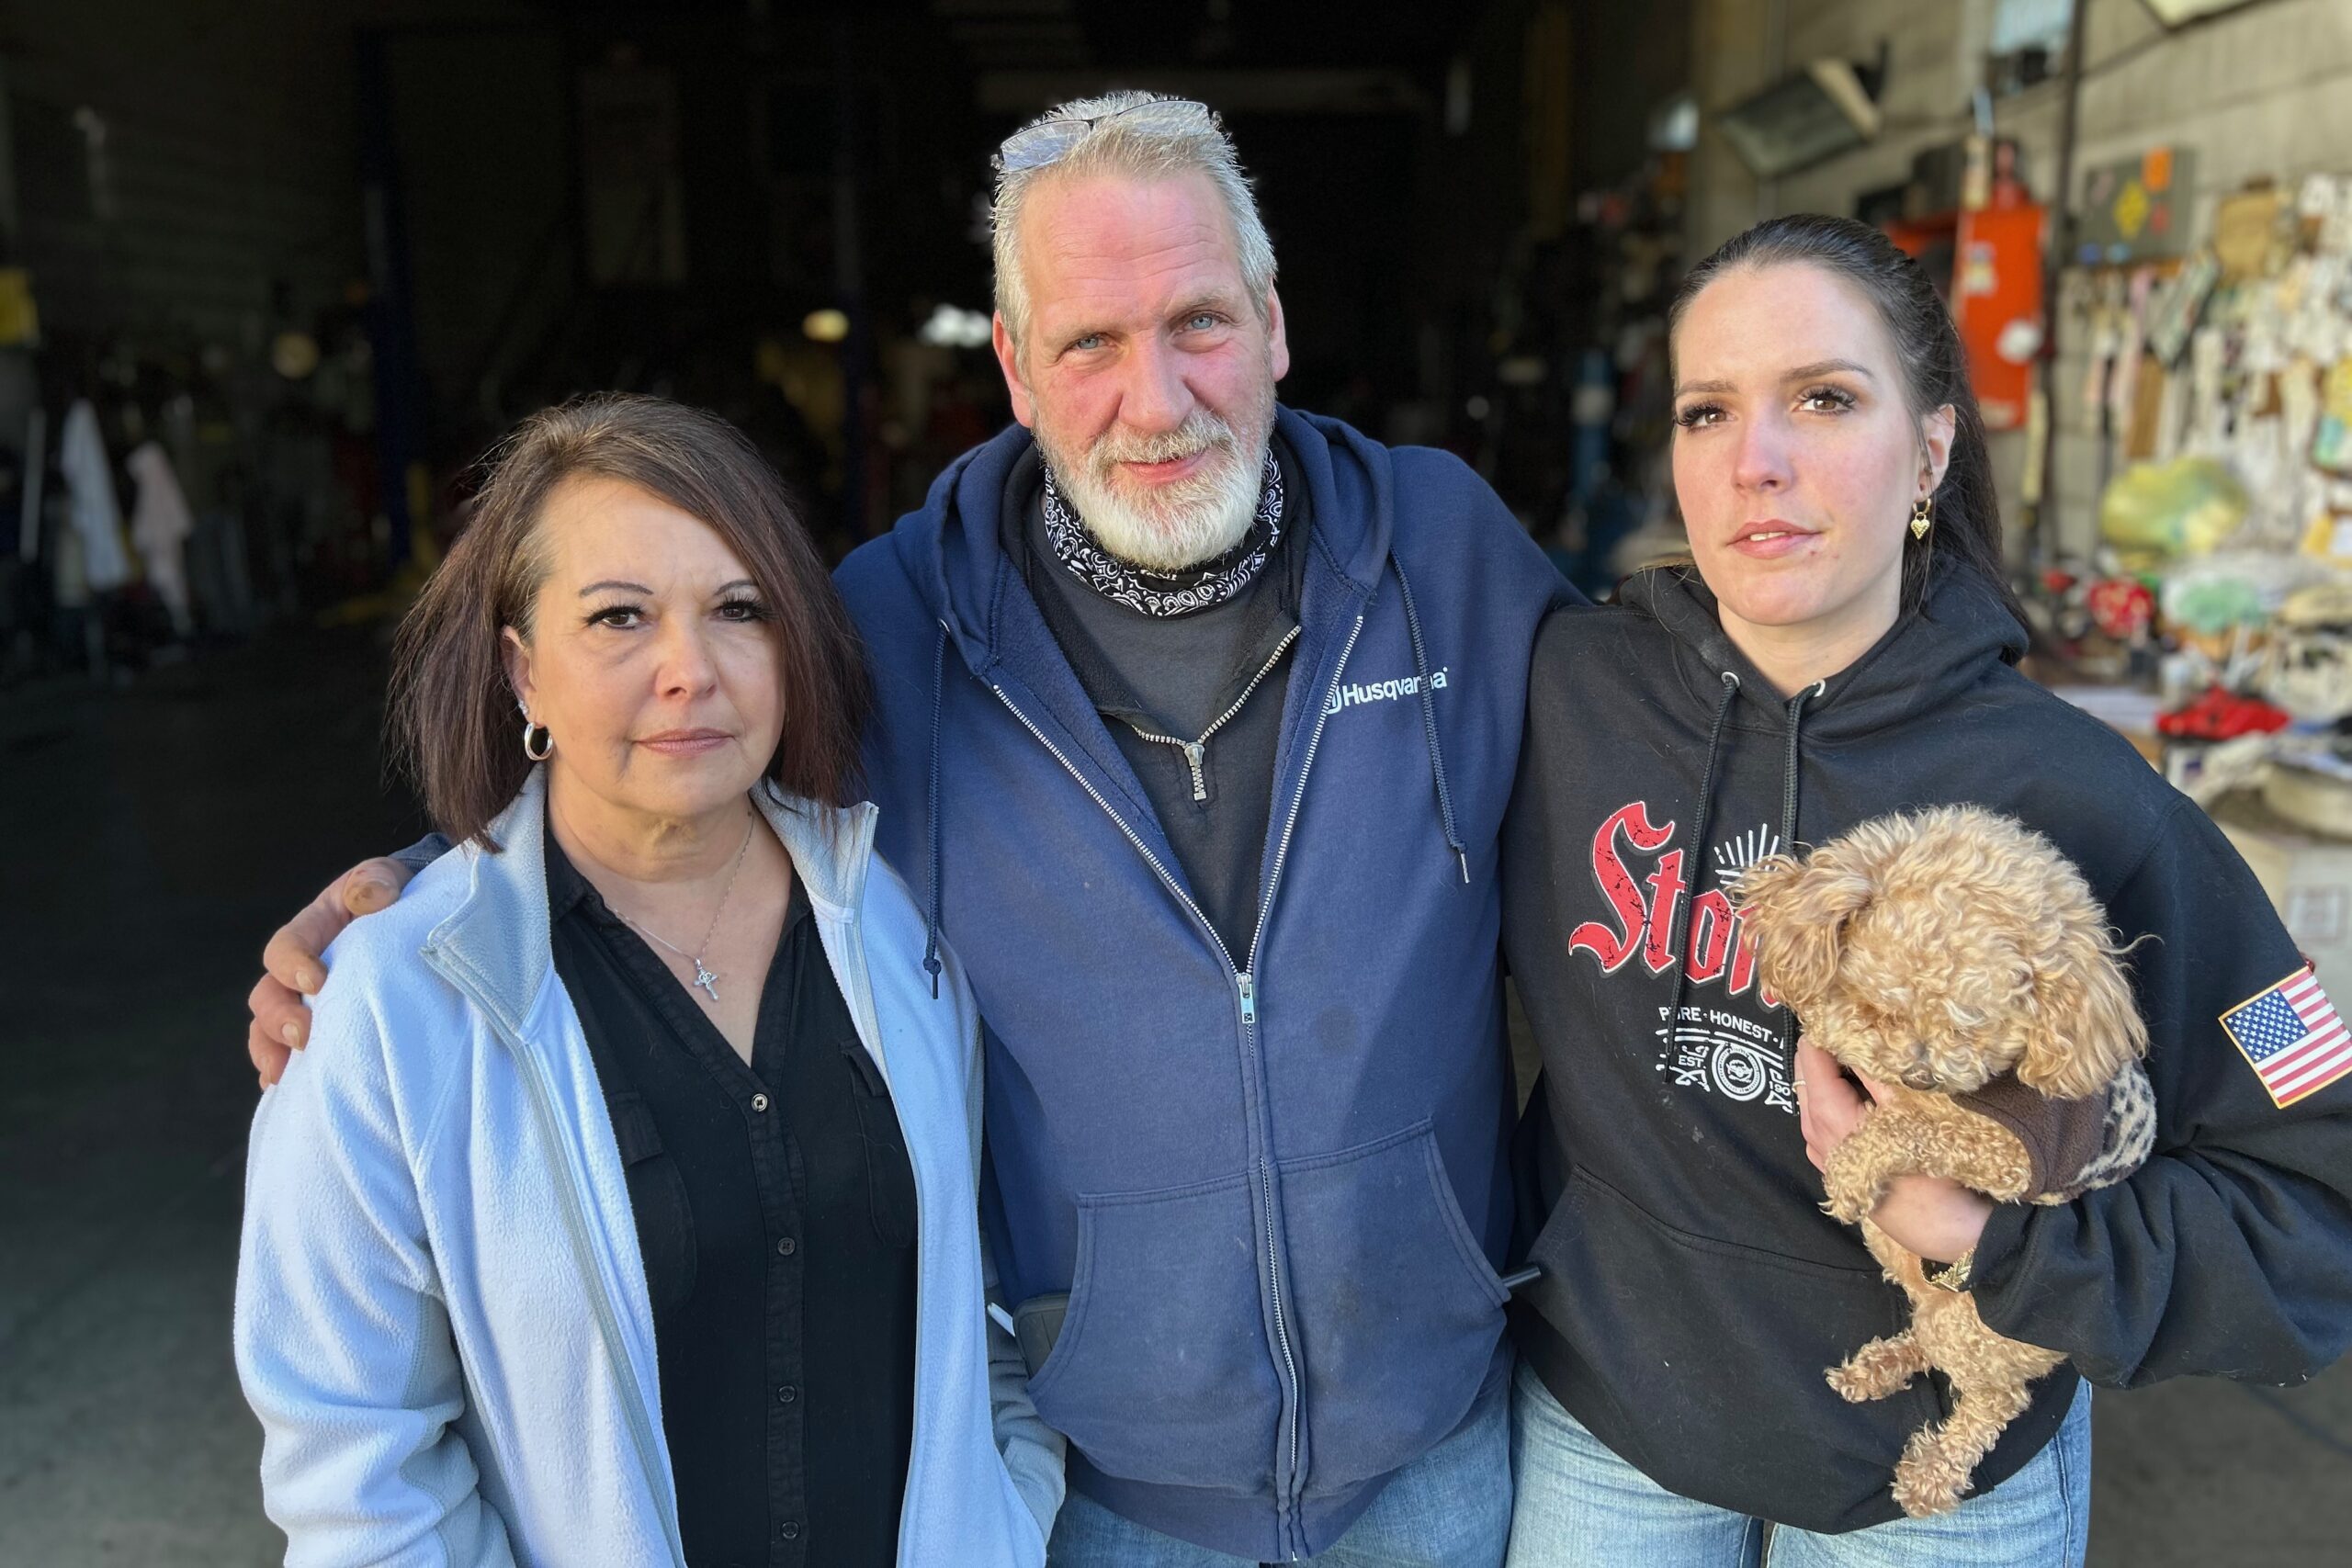 A man in a blue sweatshirt stands between two women. One is holding a small dog.